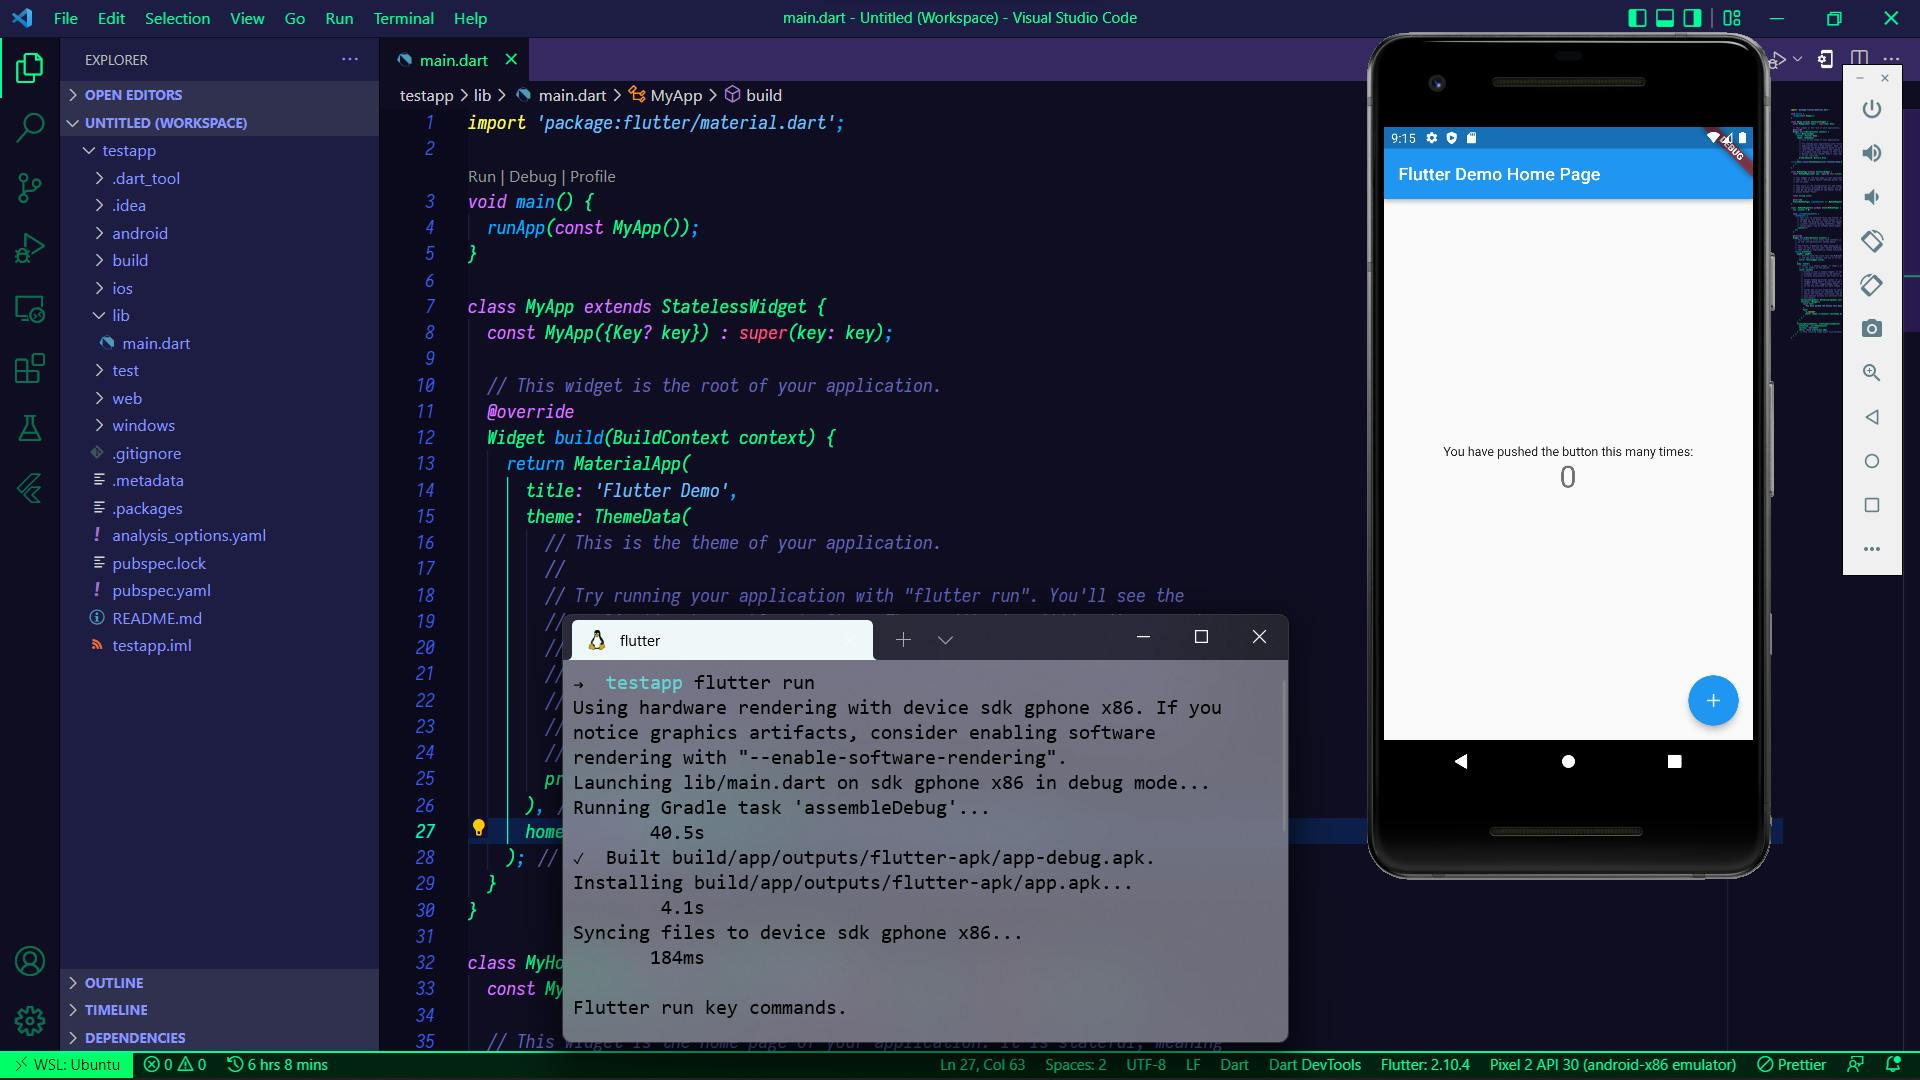 This image shows the demo Flutter app is running in the emulator